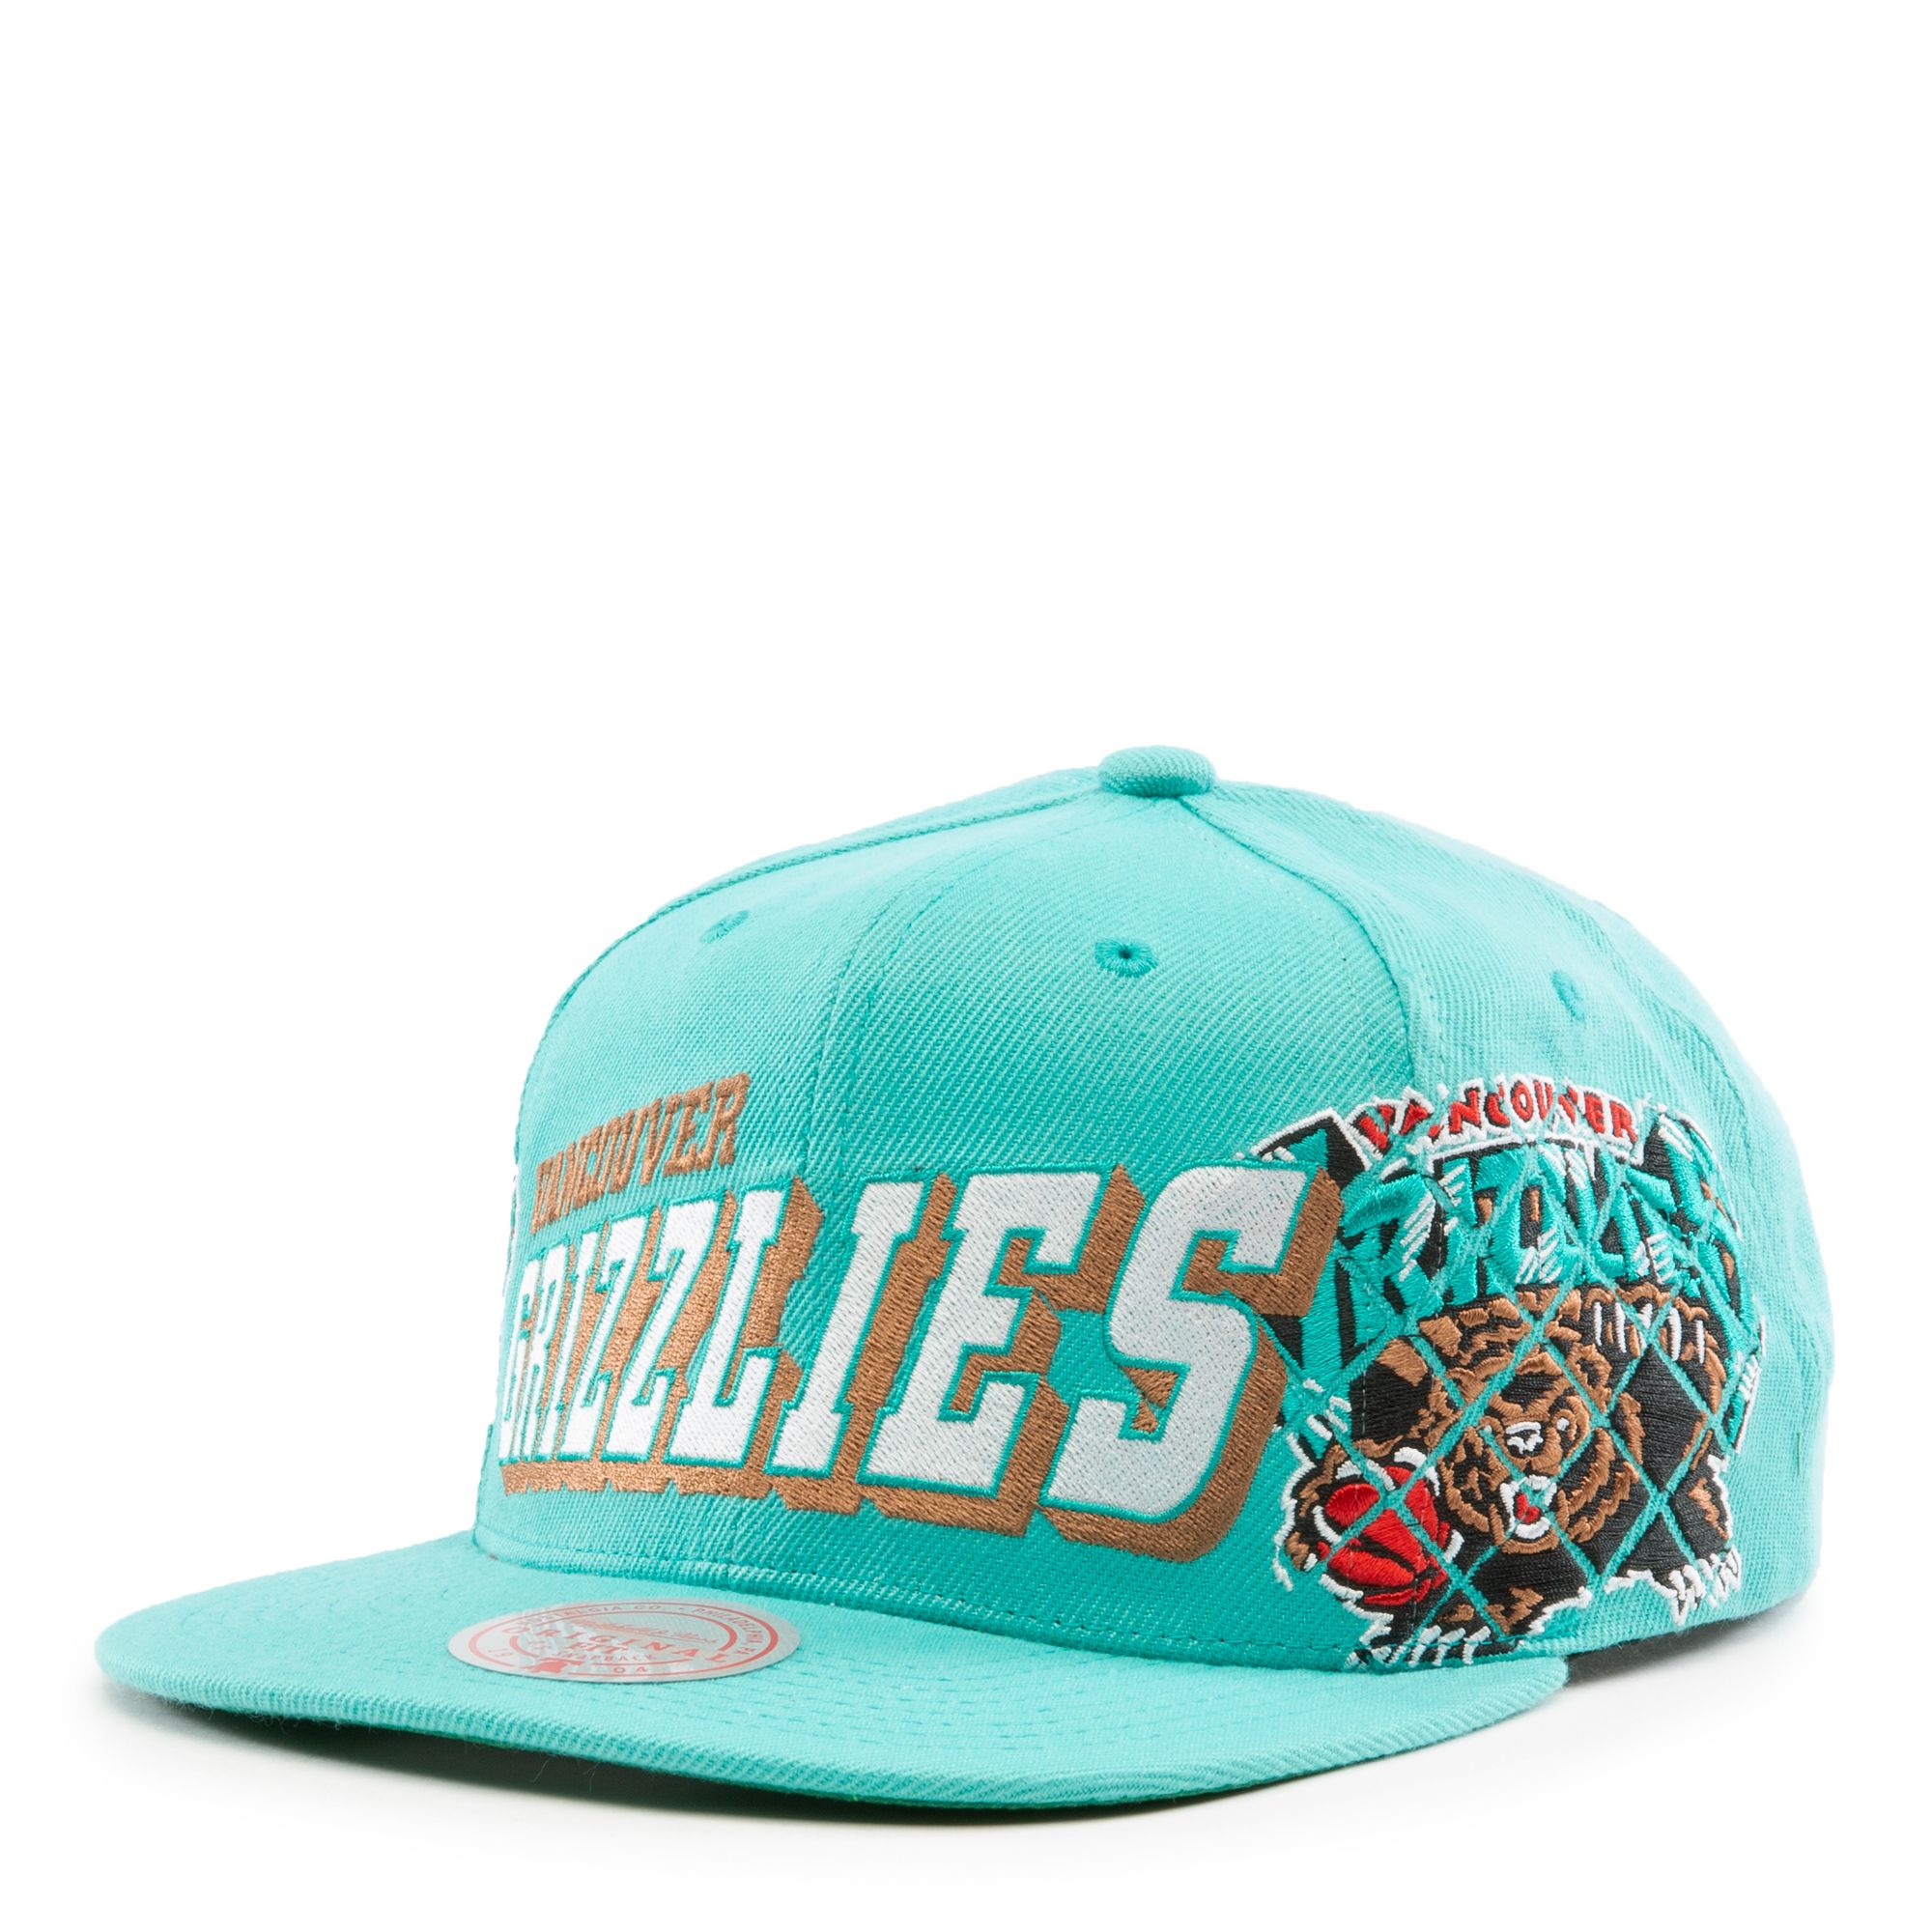 Vancouver Grizzlies Meat Paper Teal Snapback - Mitchell & Ness cap